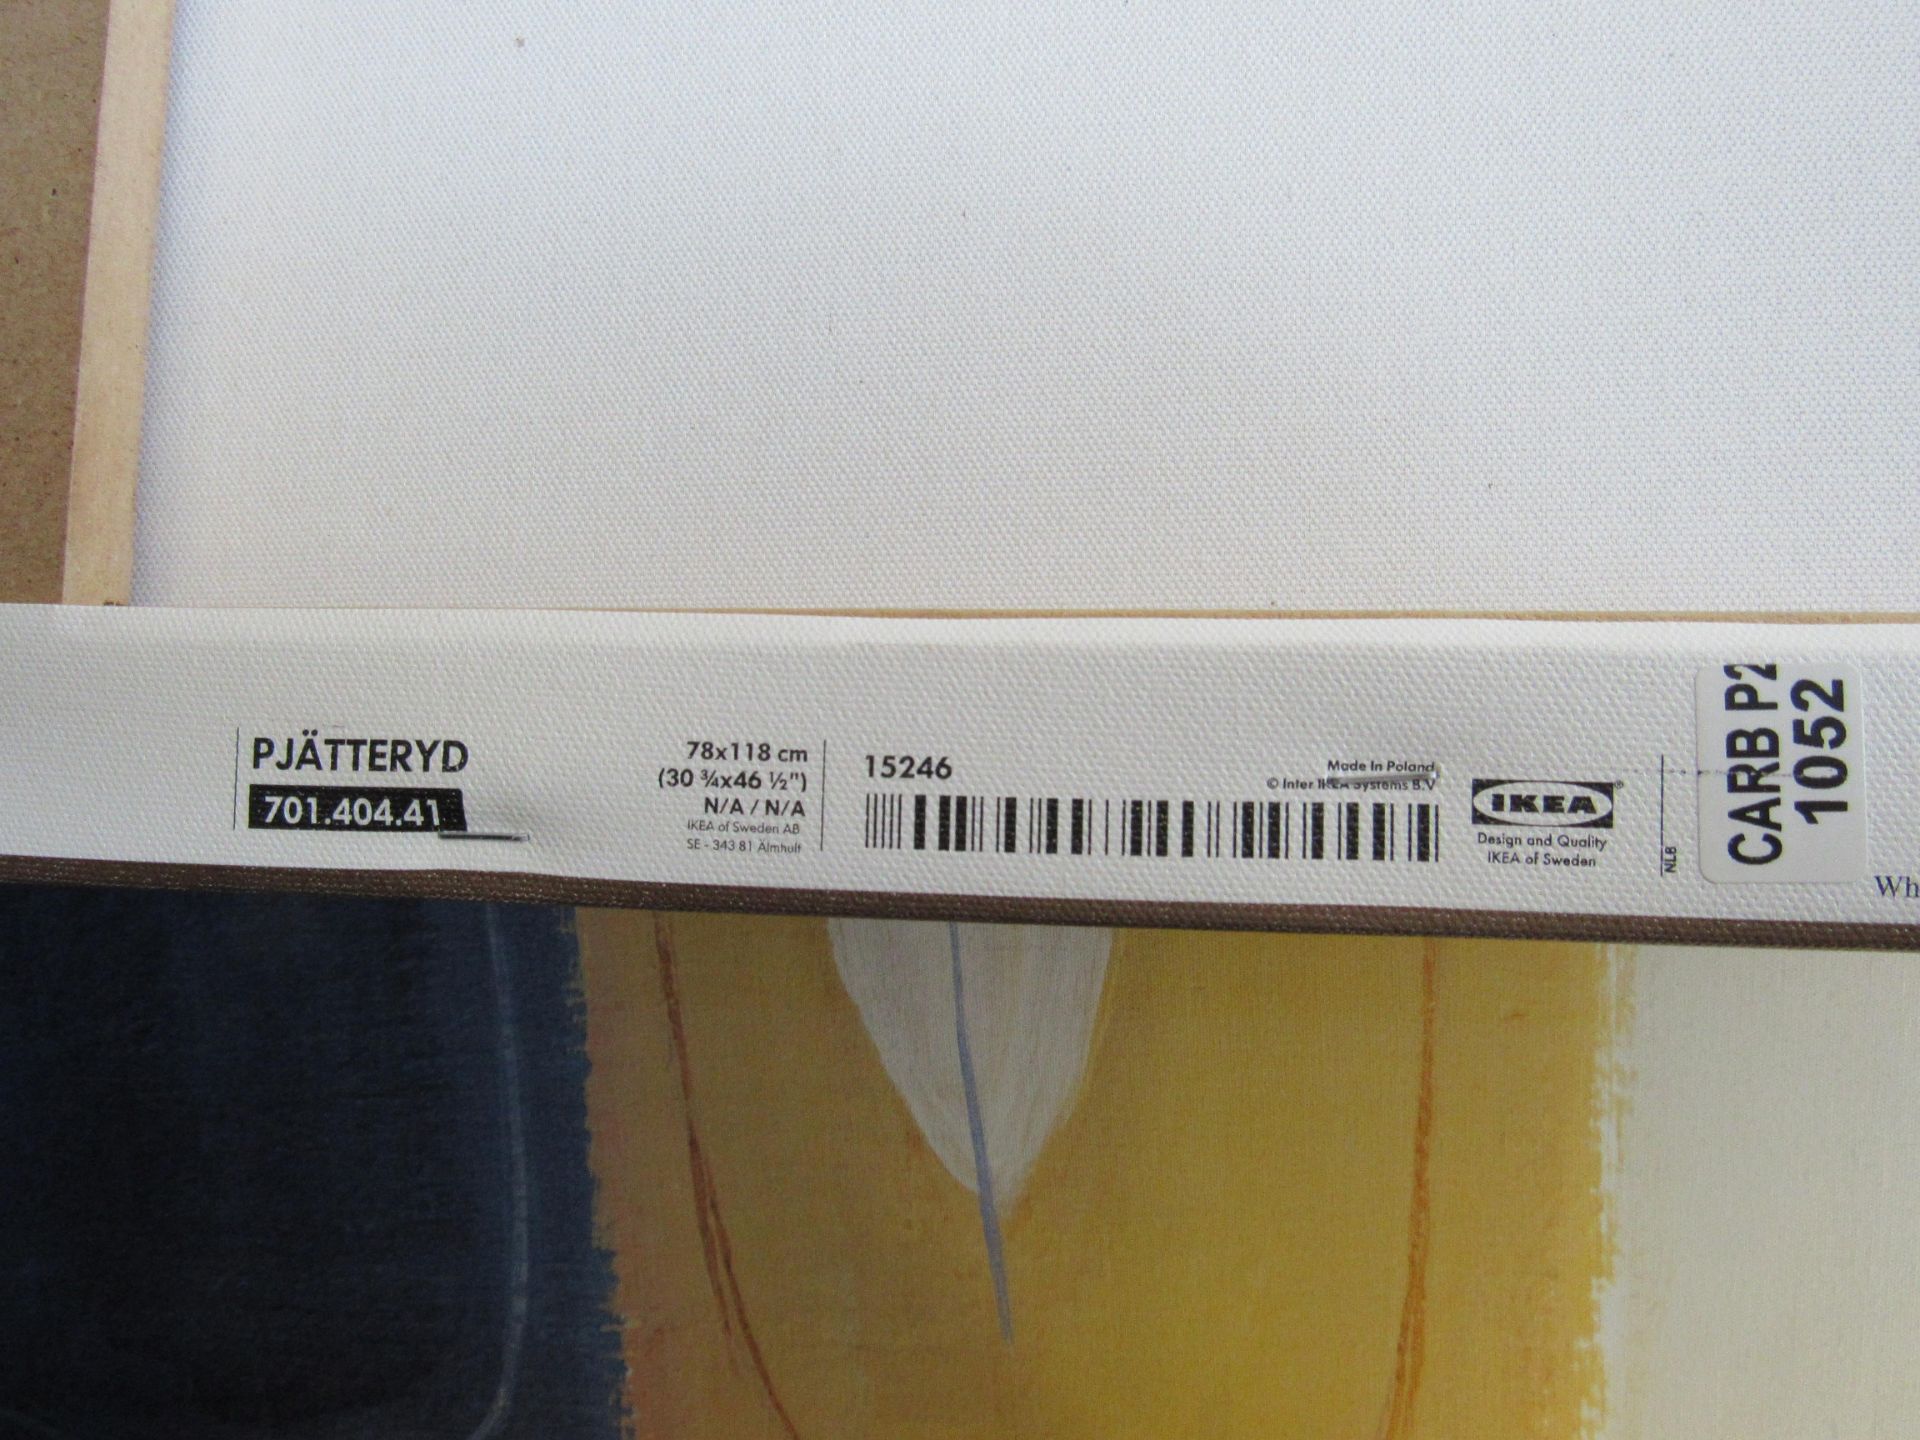 4 Large Canvas Art Prints (Ikea) – (Located in York) - Image 4 of 10